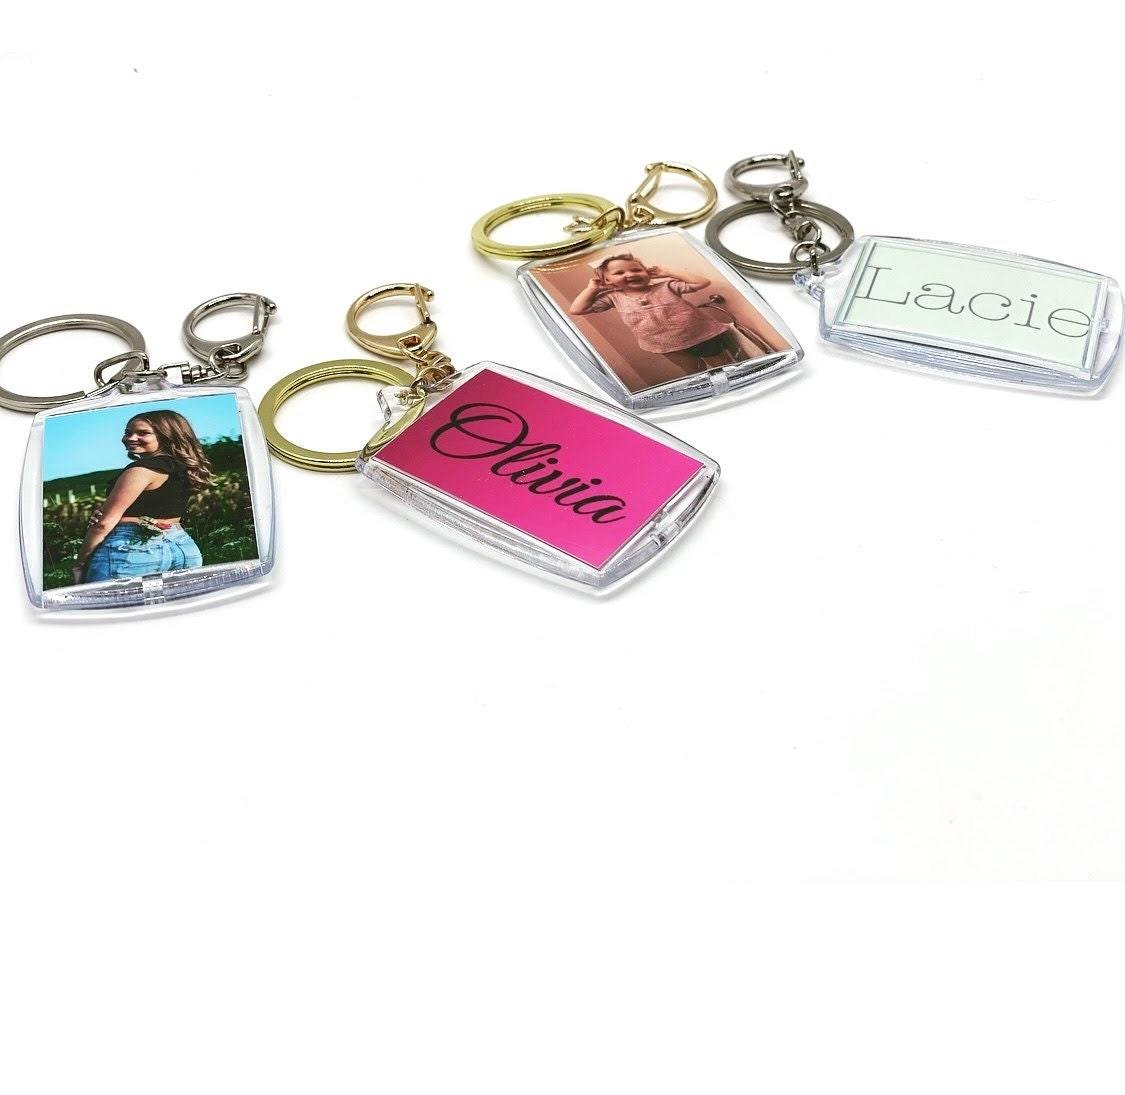 SmiLeStyles Personalized Name Keychain Option to Add Photo. Clip and Key Ring. Purse Accessory Zipper Pull. Silver or Gold Finish.